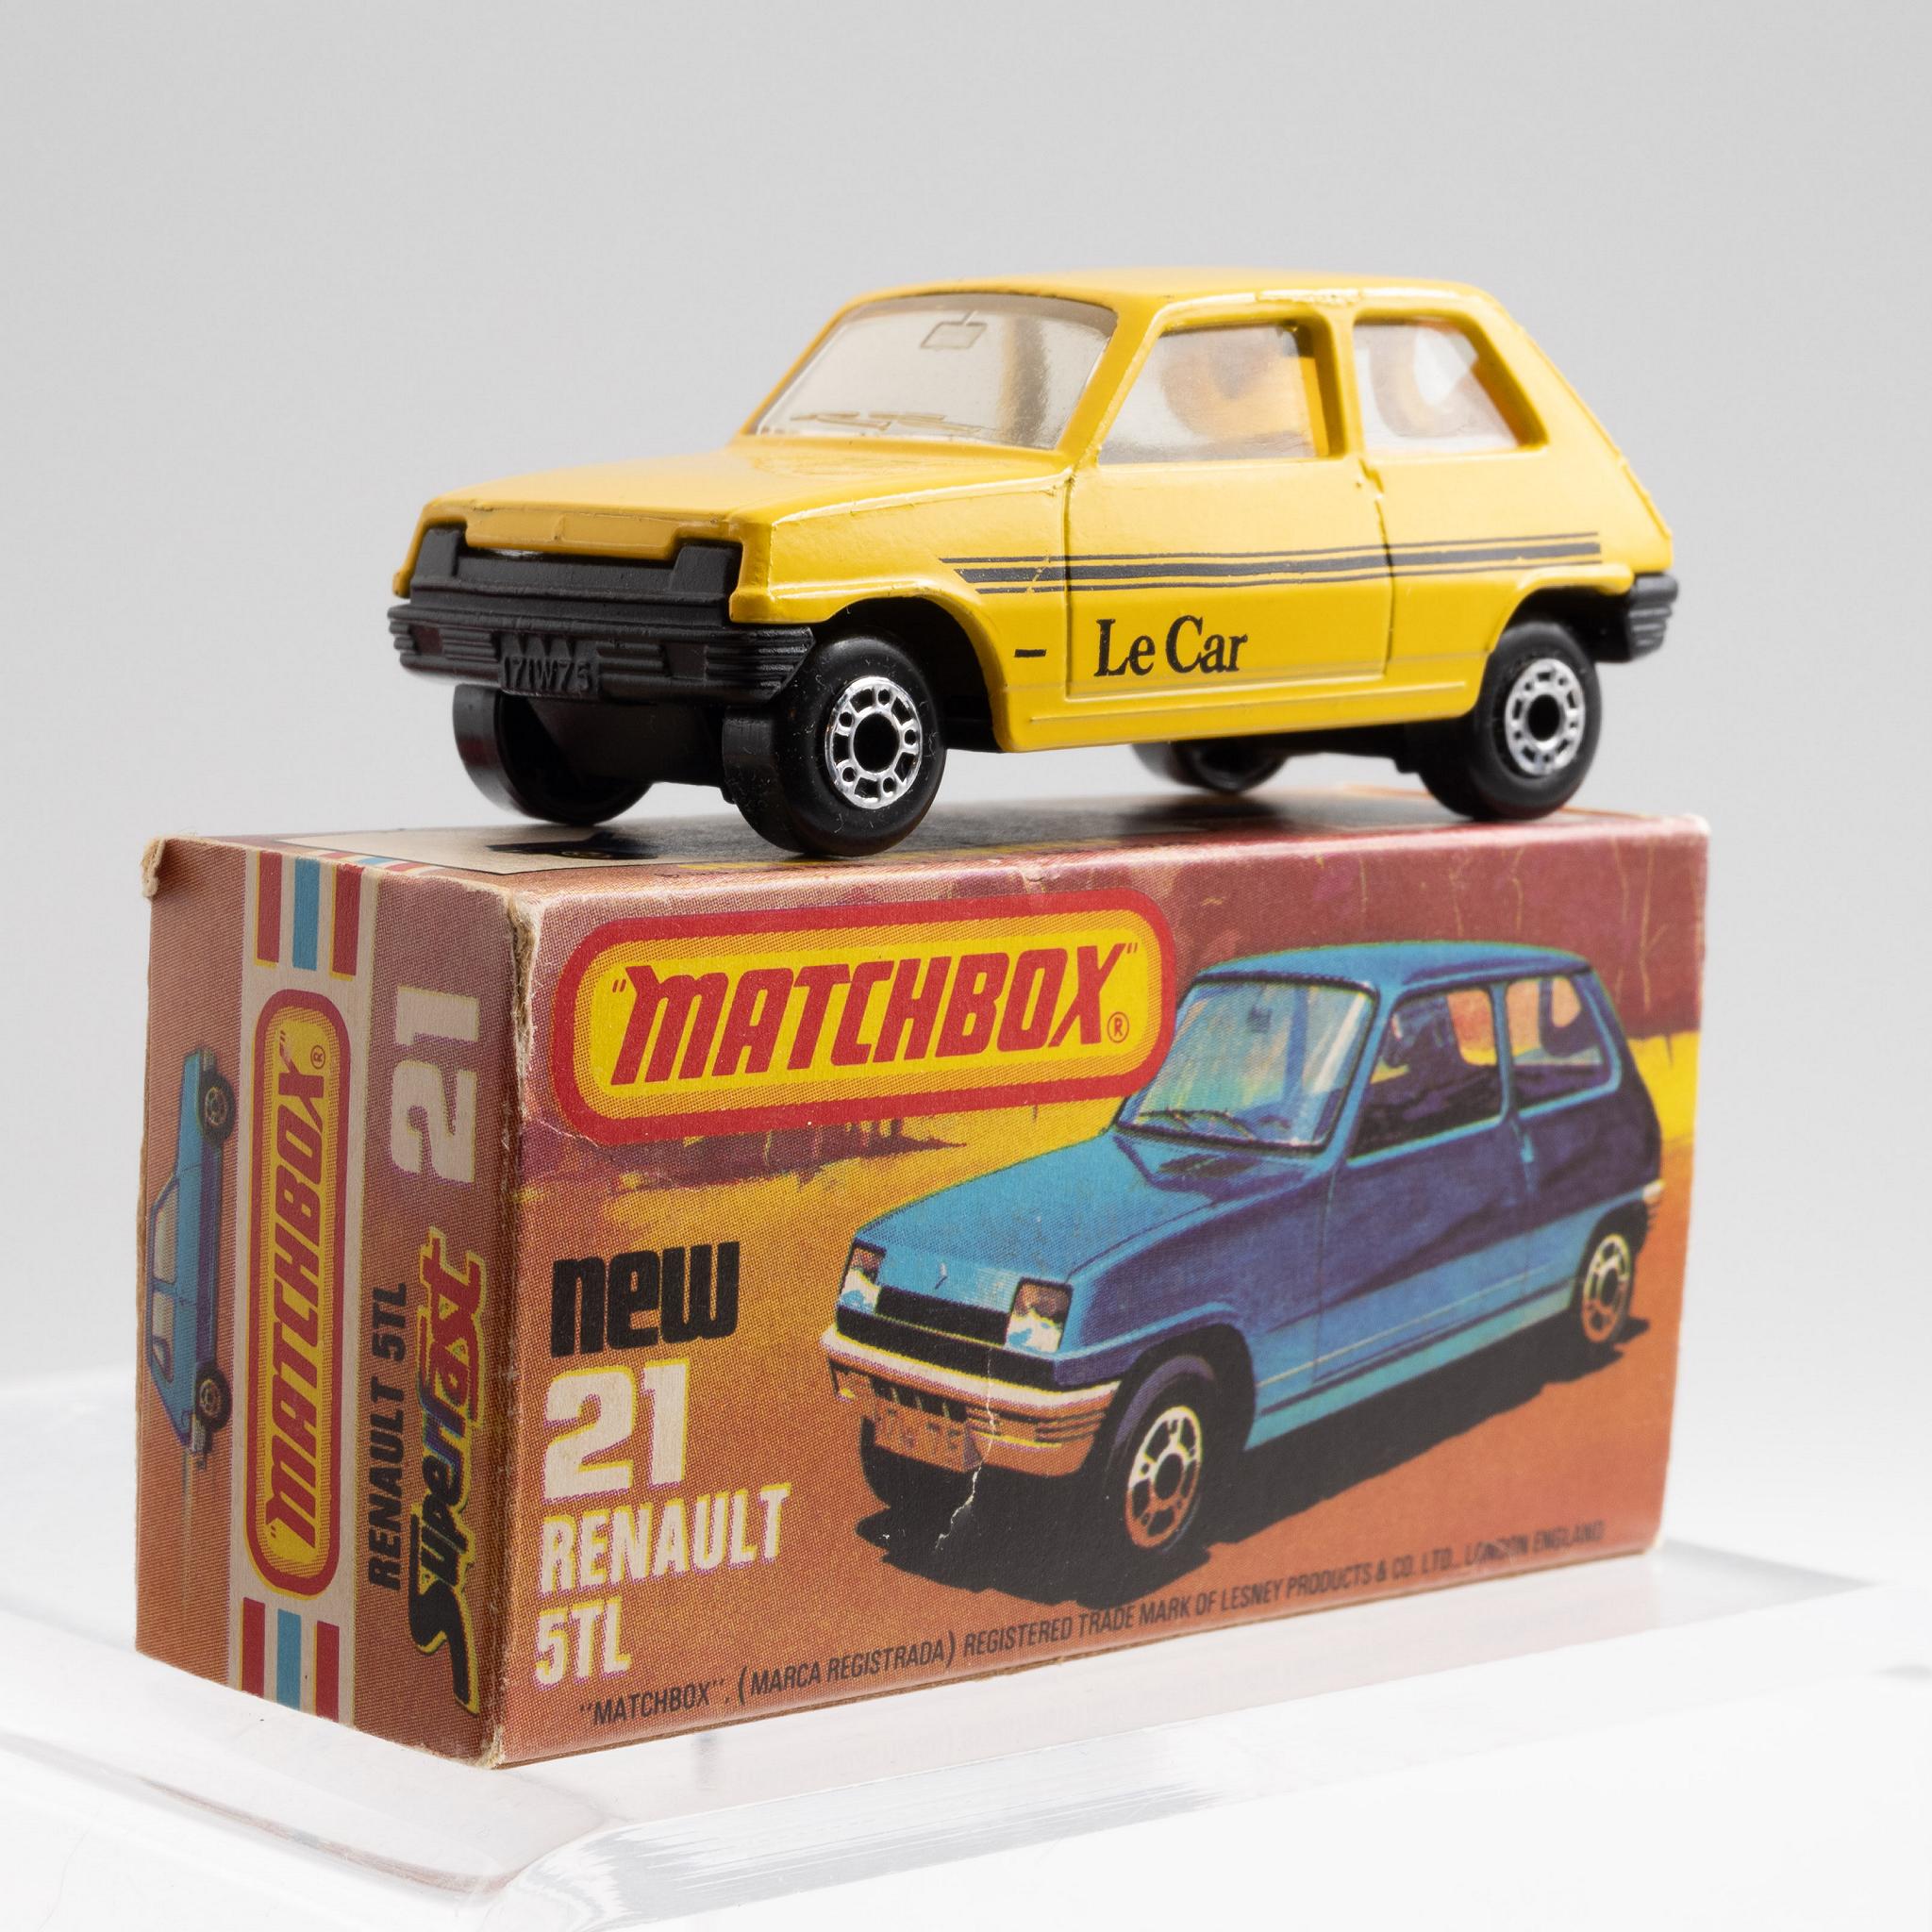 Matchbox+Superfast+21+Renault+5TL+in+Box+Yellow+Le+Car picture 2